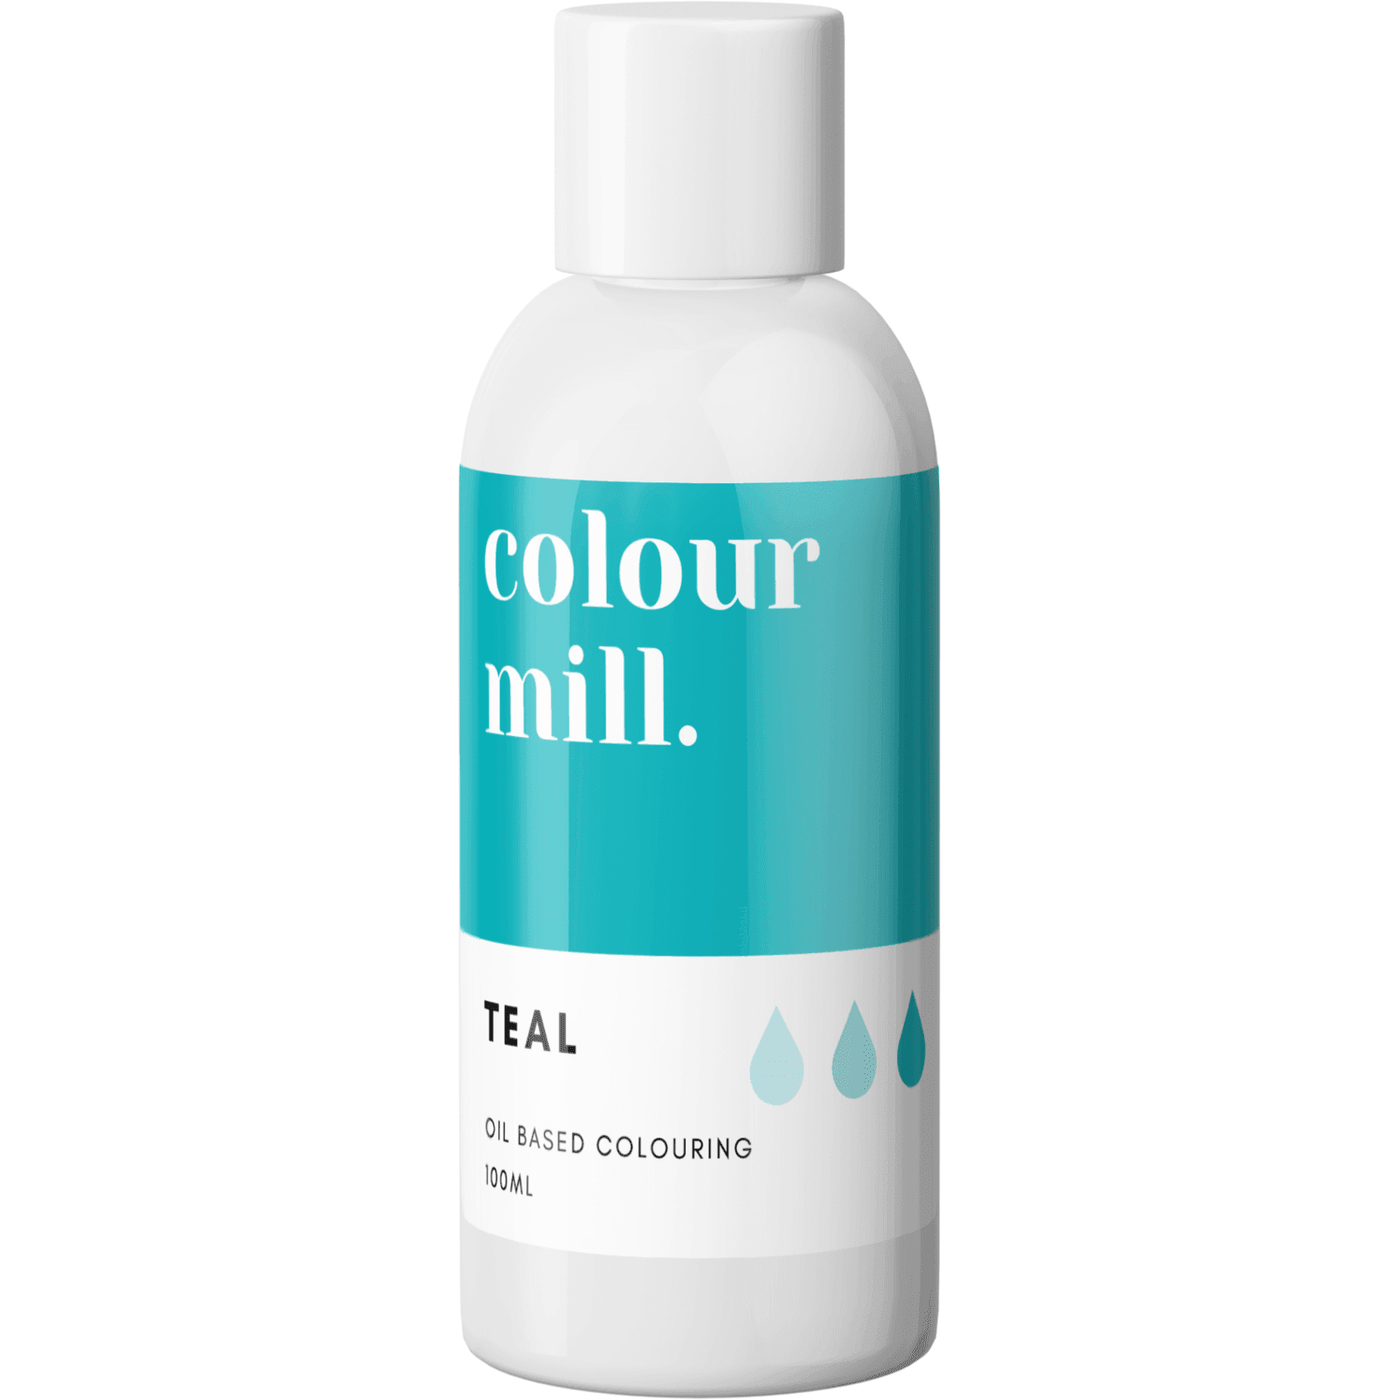 Colorant Liposoluble - Colour Mill Teal - Patissland